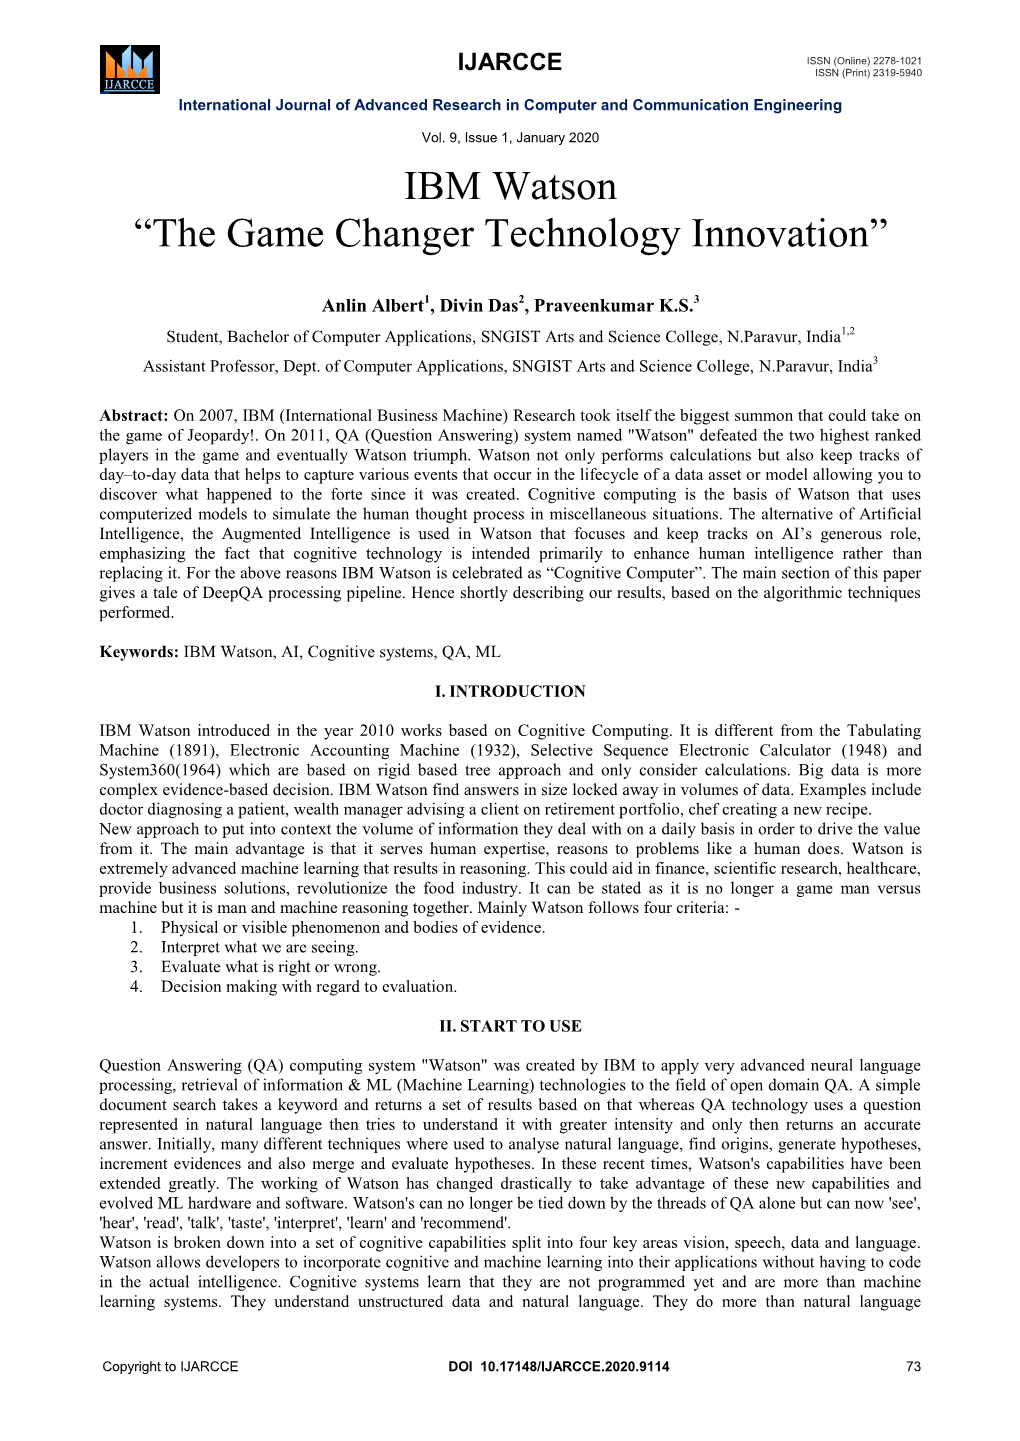 IBM Watson “The Game Changer Technology Innovation”